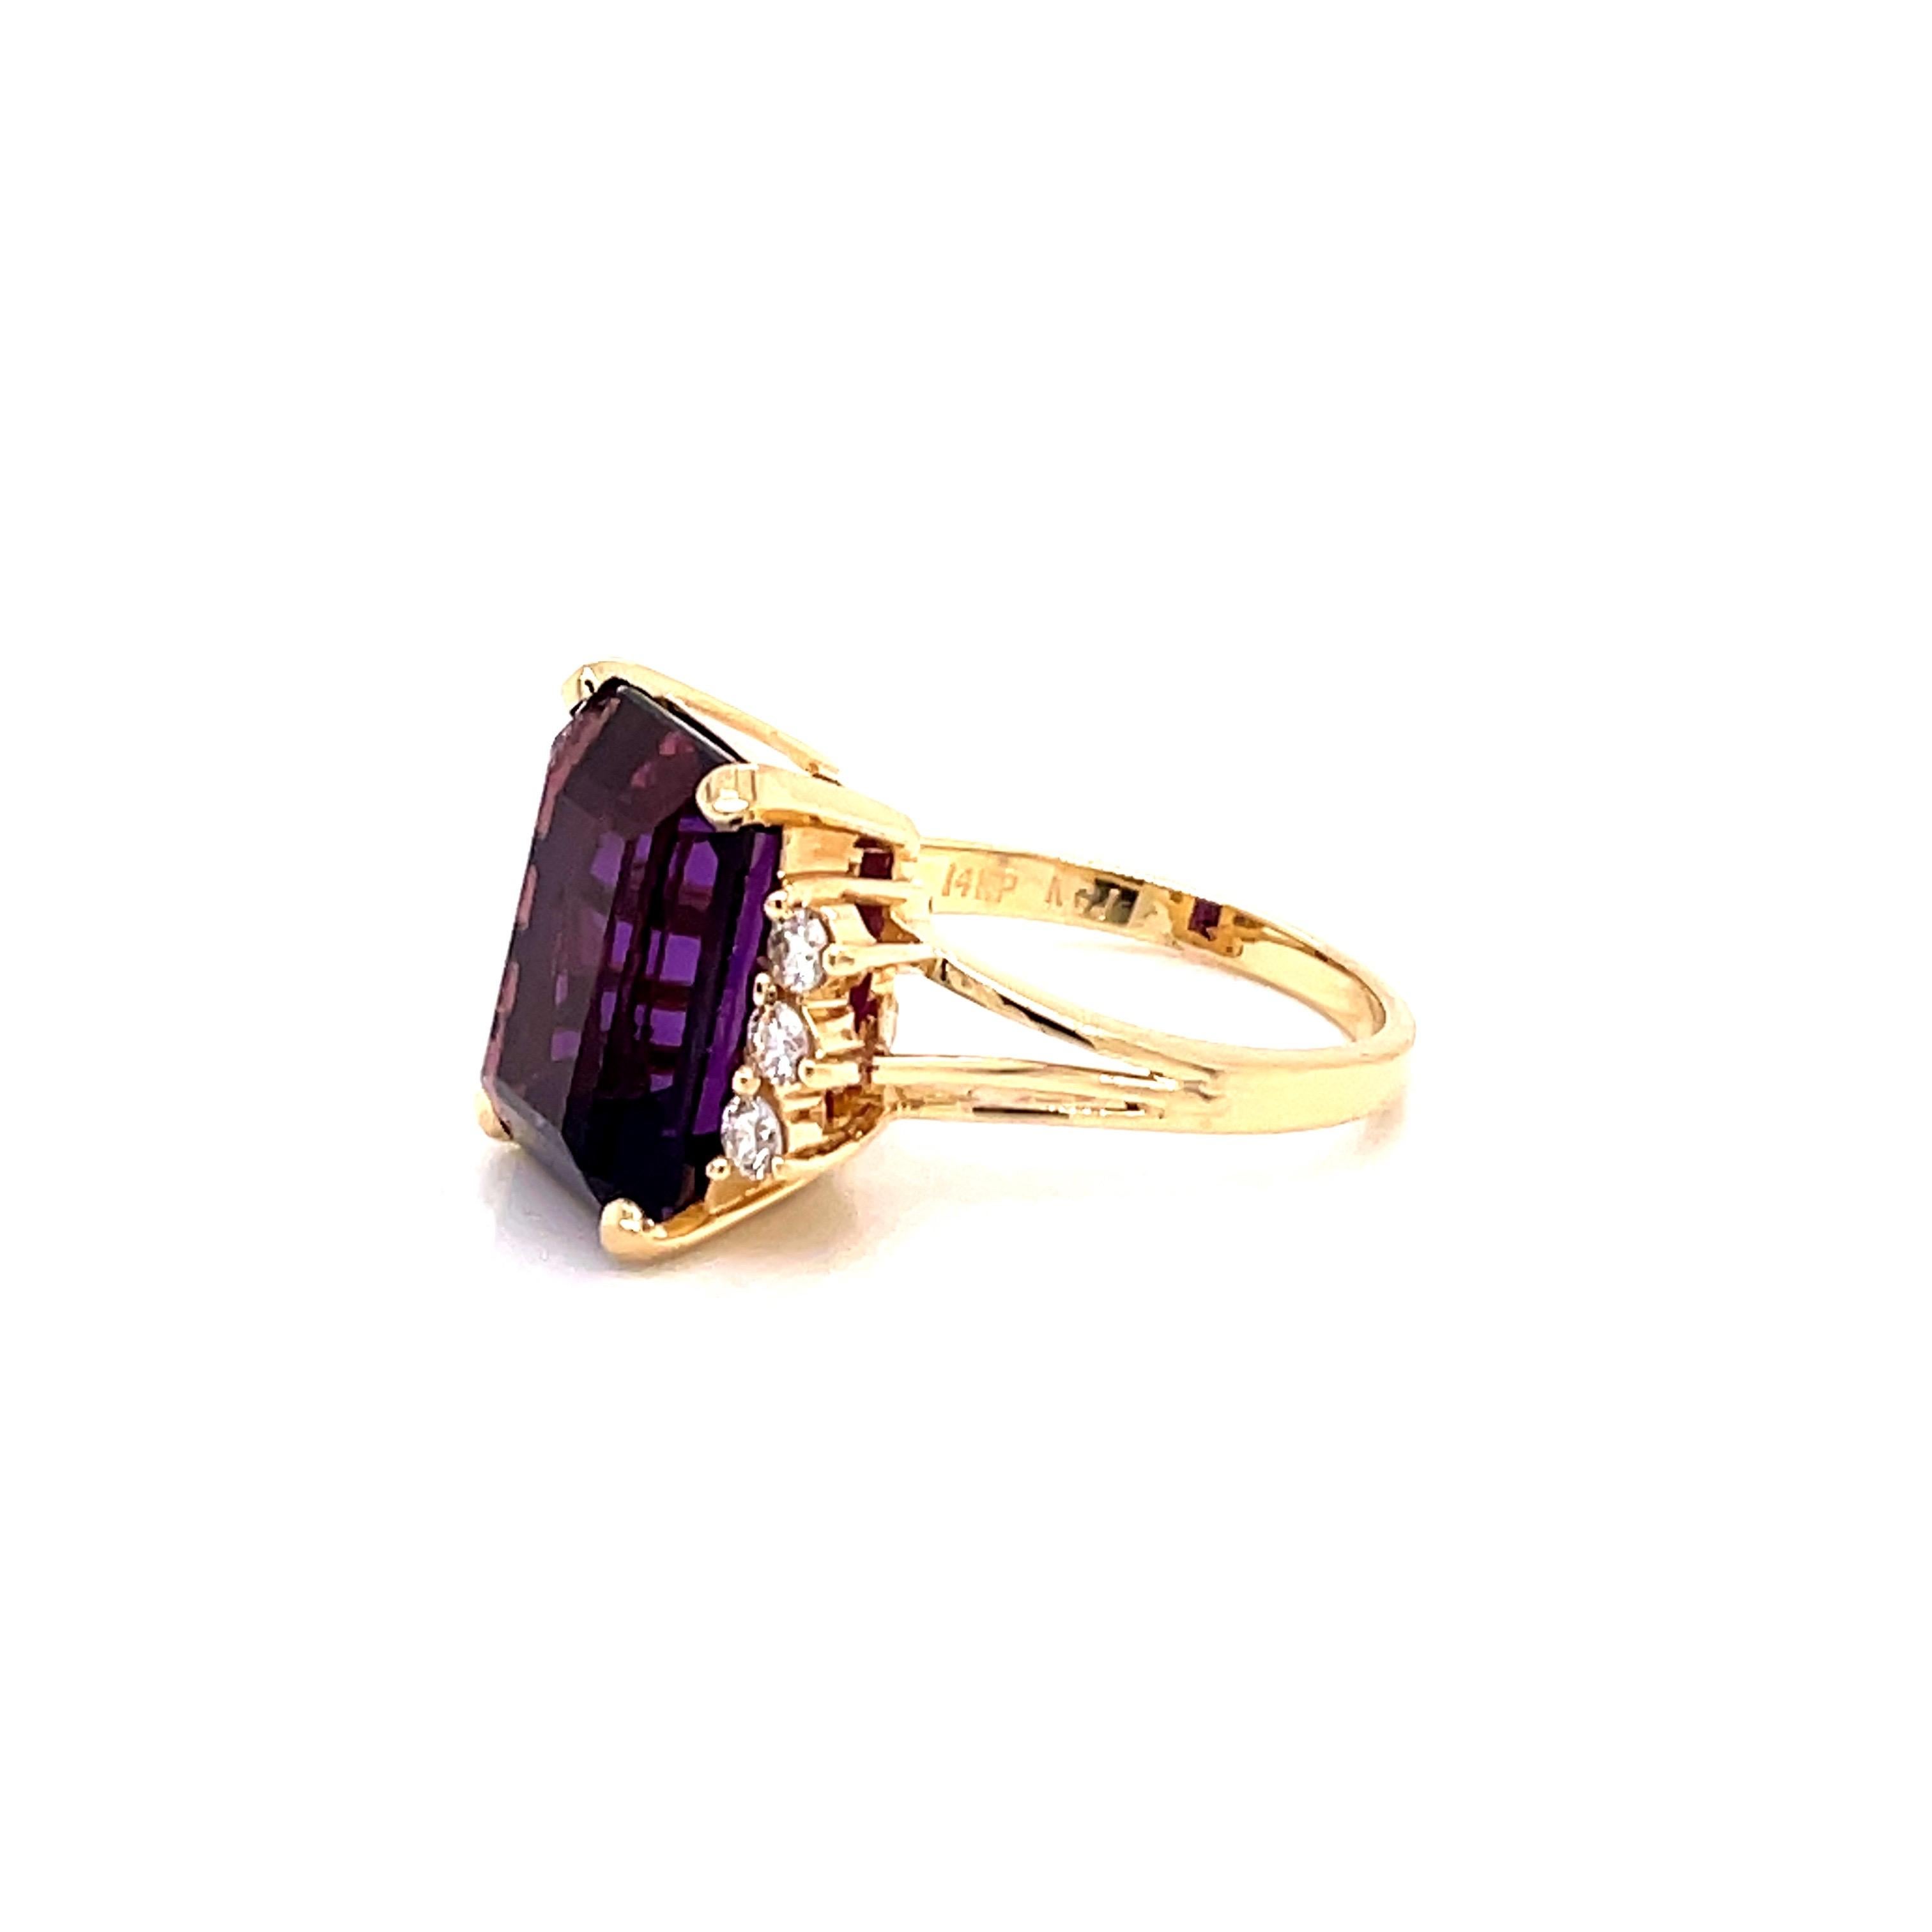 Vintage 1980's 7.35ct Emerald Cut Amethyst Ring with Diamonds 1